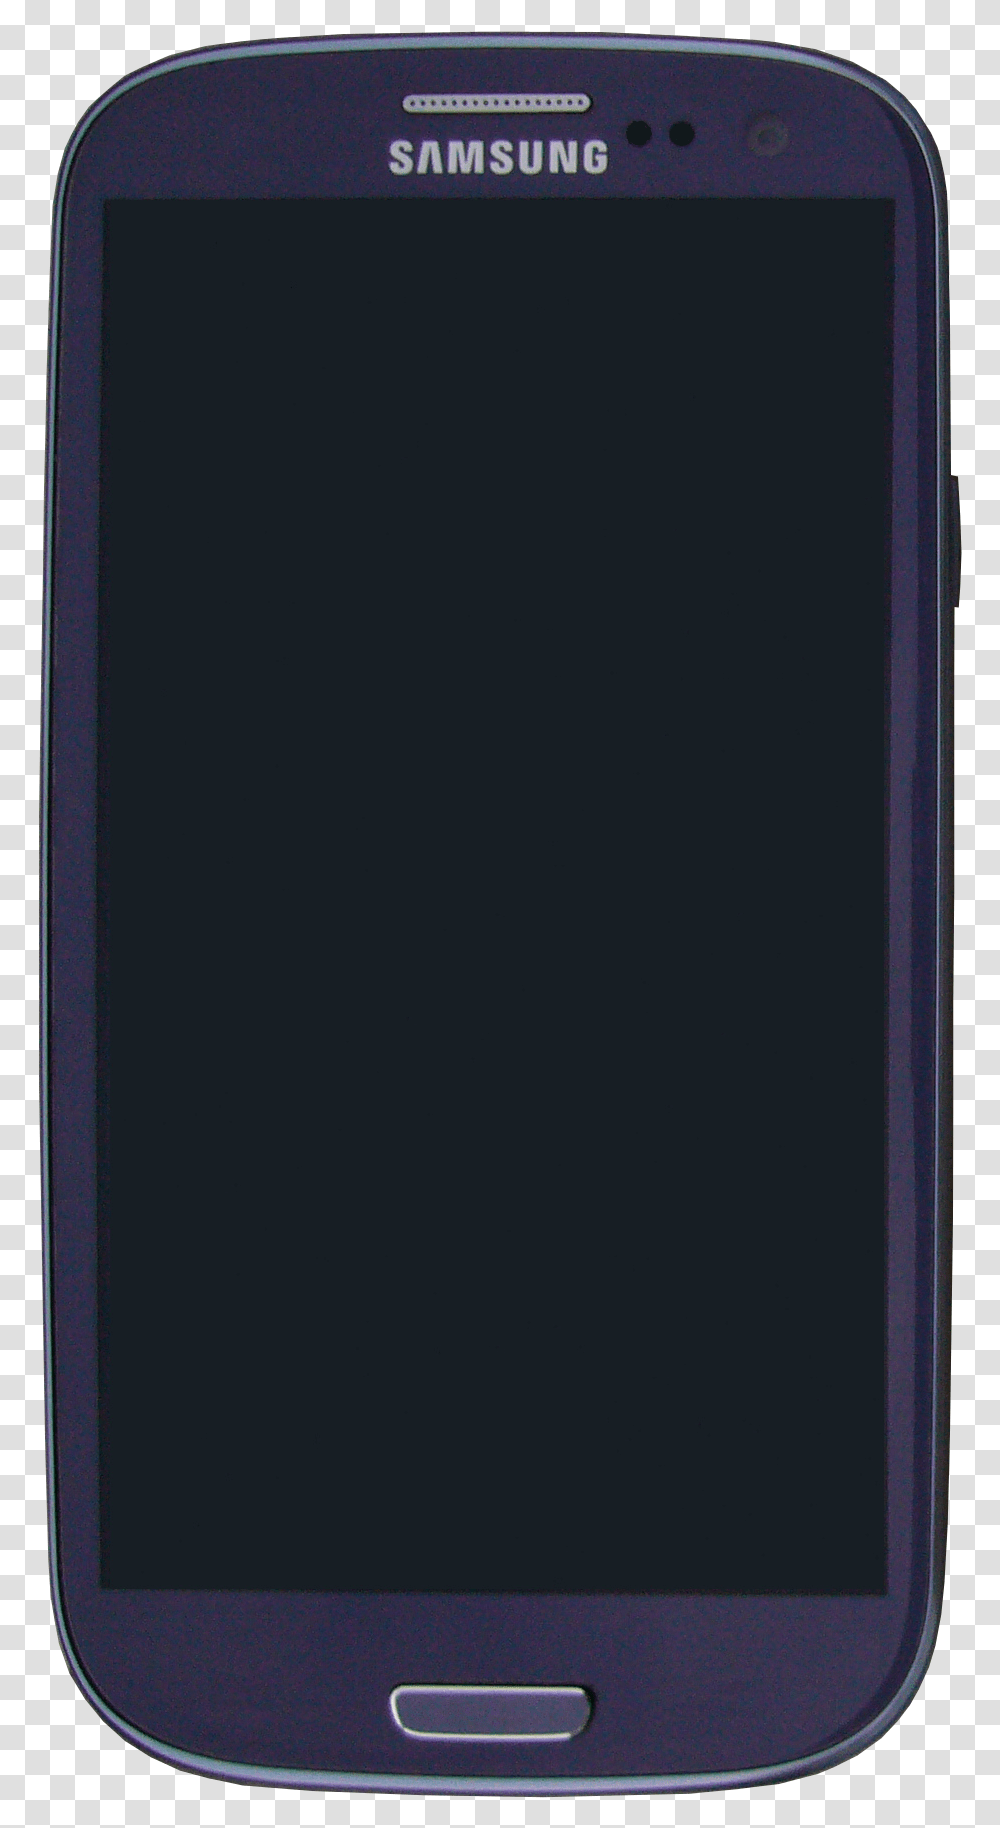 Samsung Galaxy S Iii Pebble Blue Samsung Galaxy 3, Mobile Phone, Electronics, Cell Phone, Iphone Transparent Png